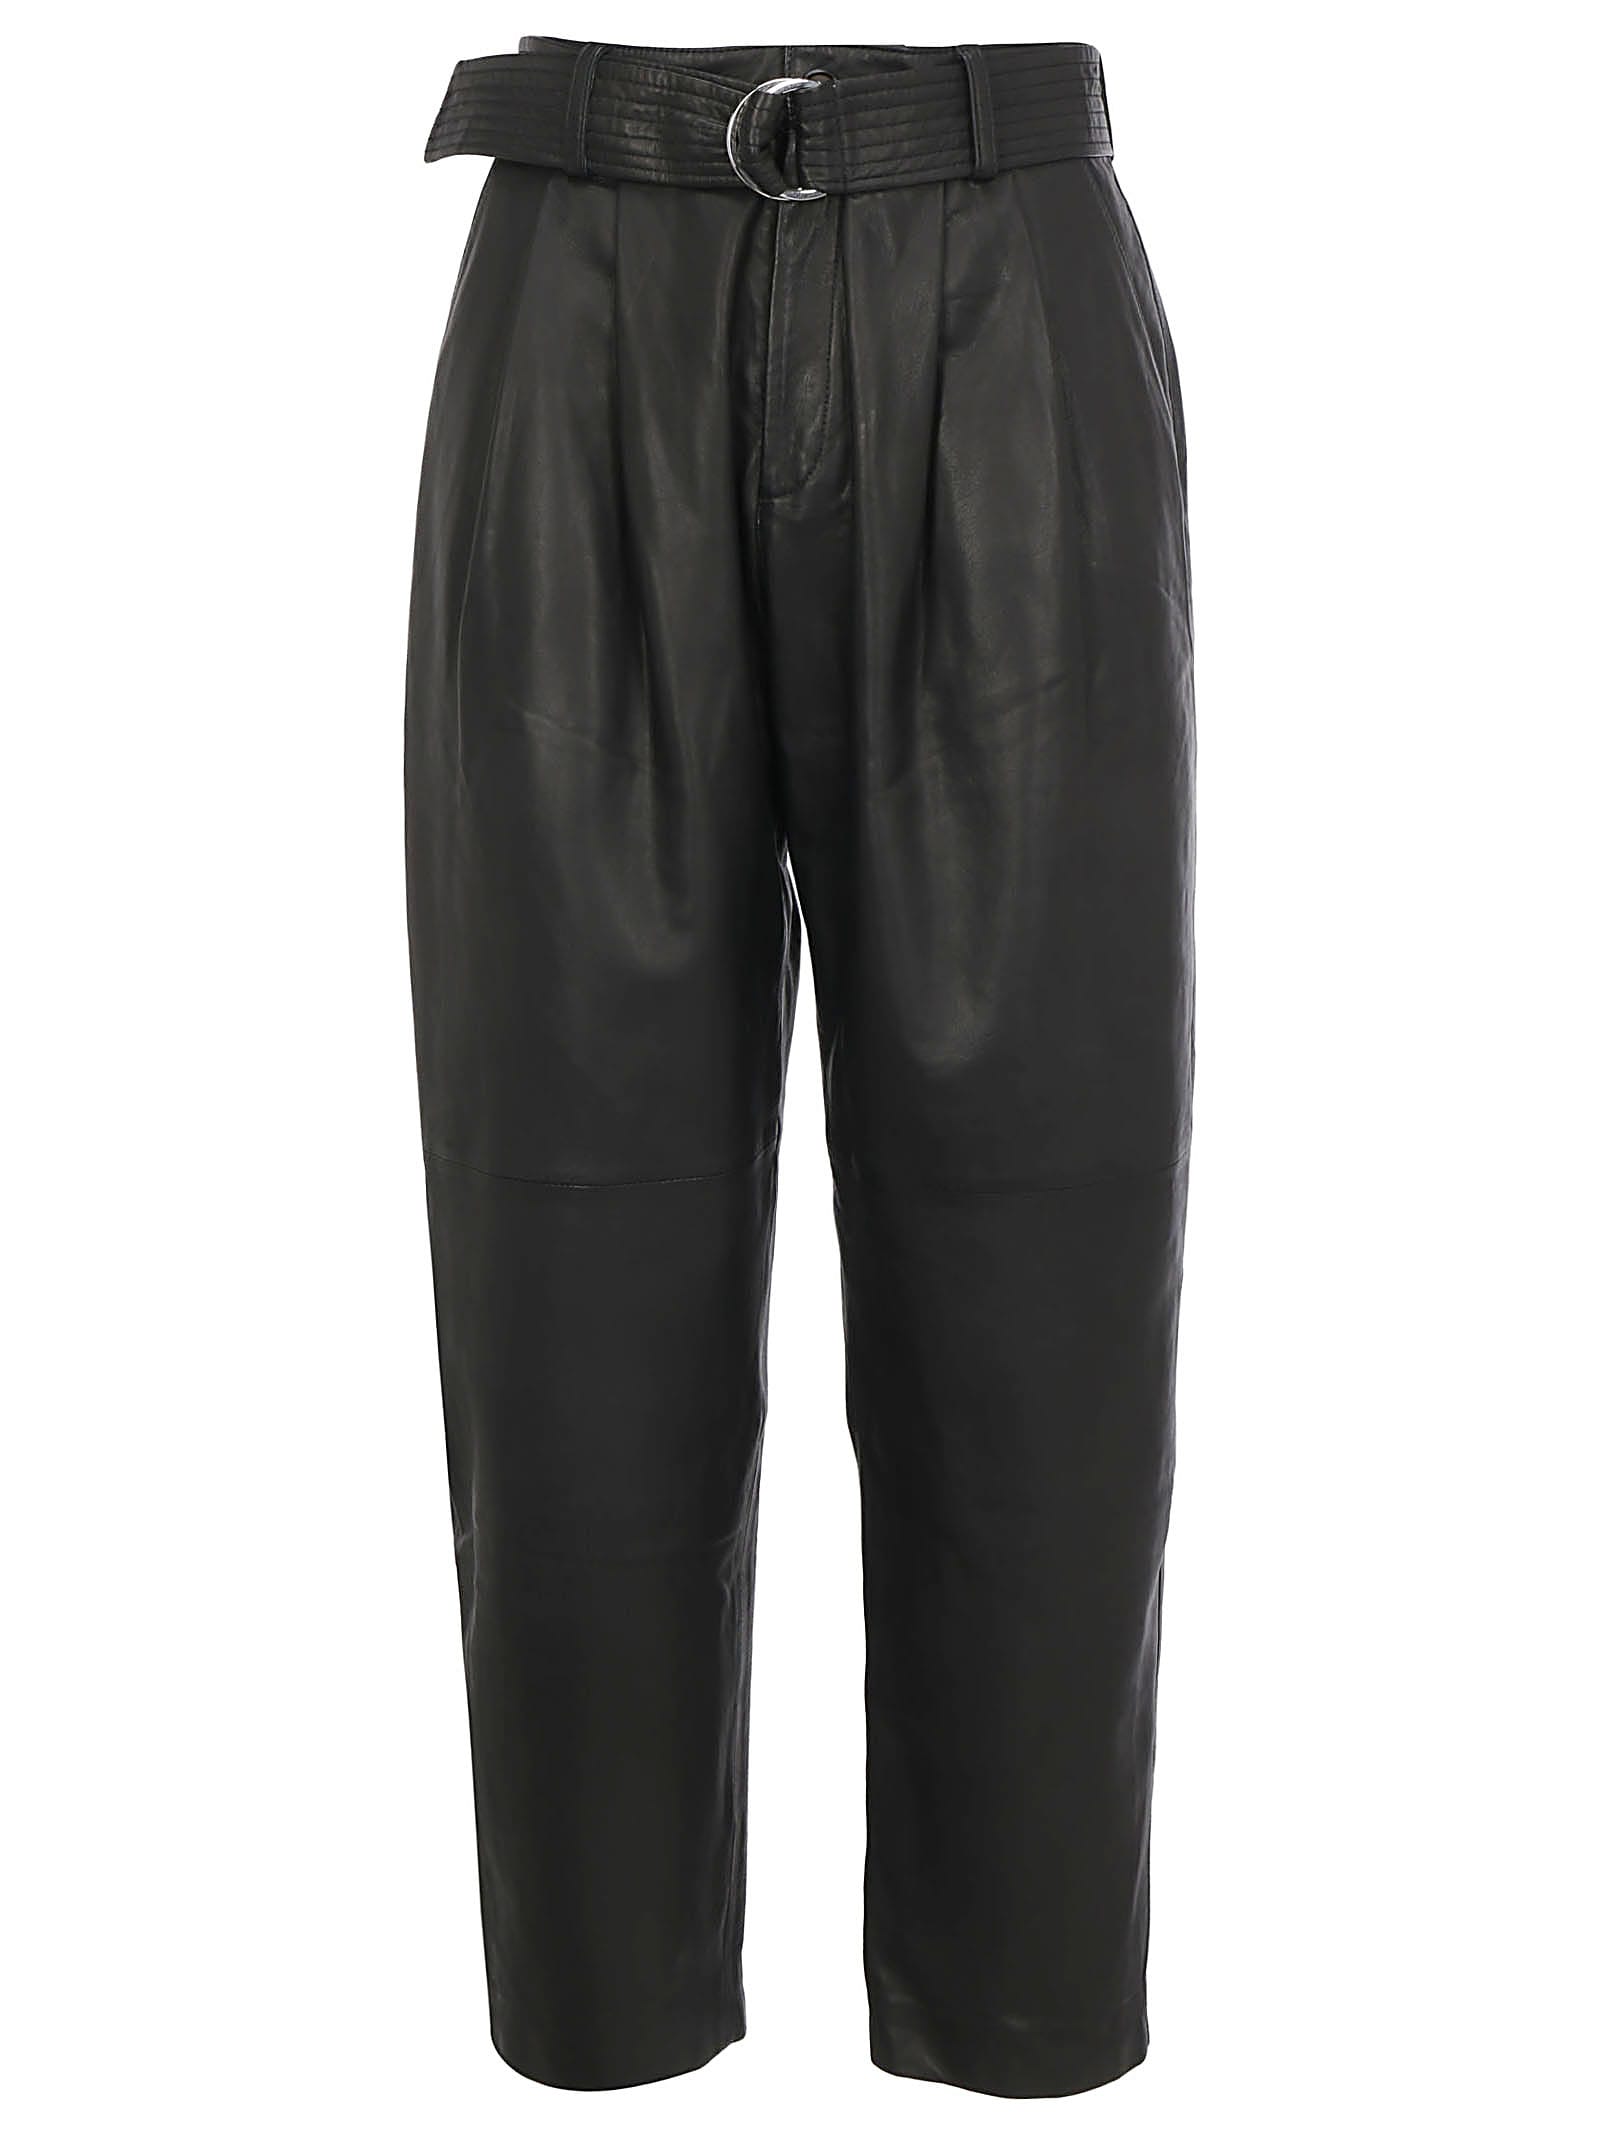 P.A.R.O.S.H LEATHER PANTS,11298881